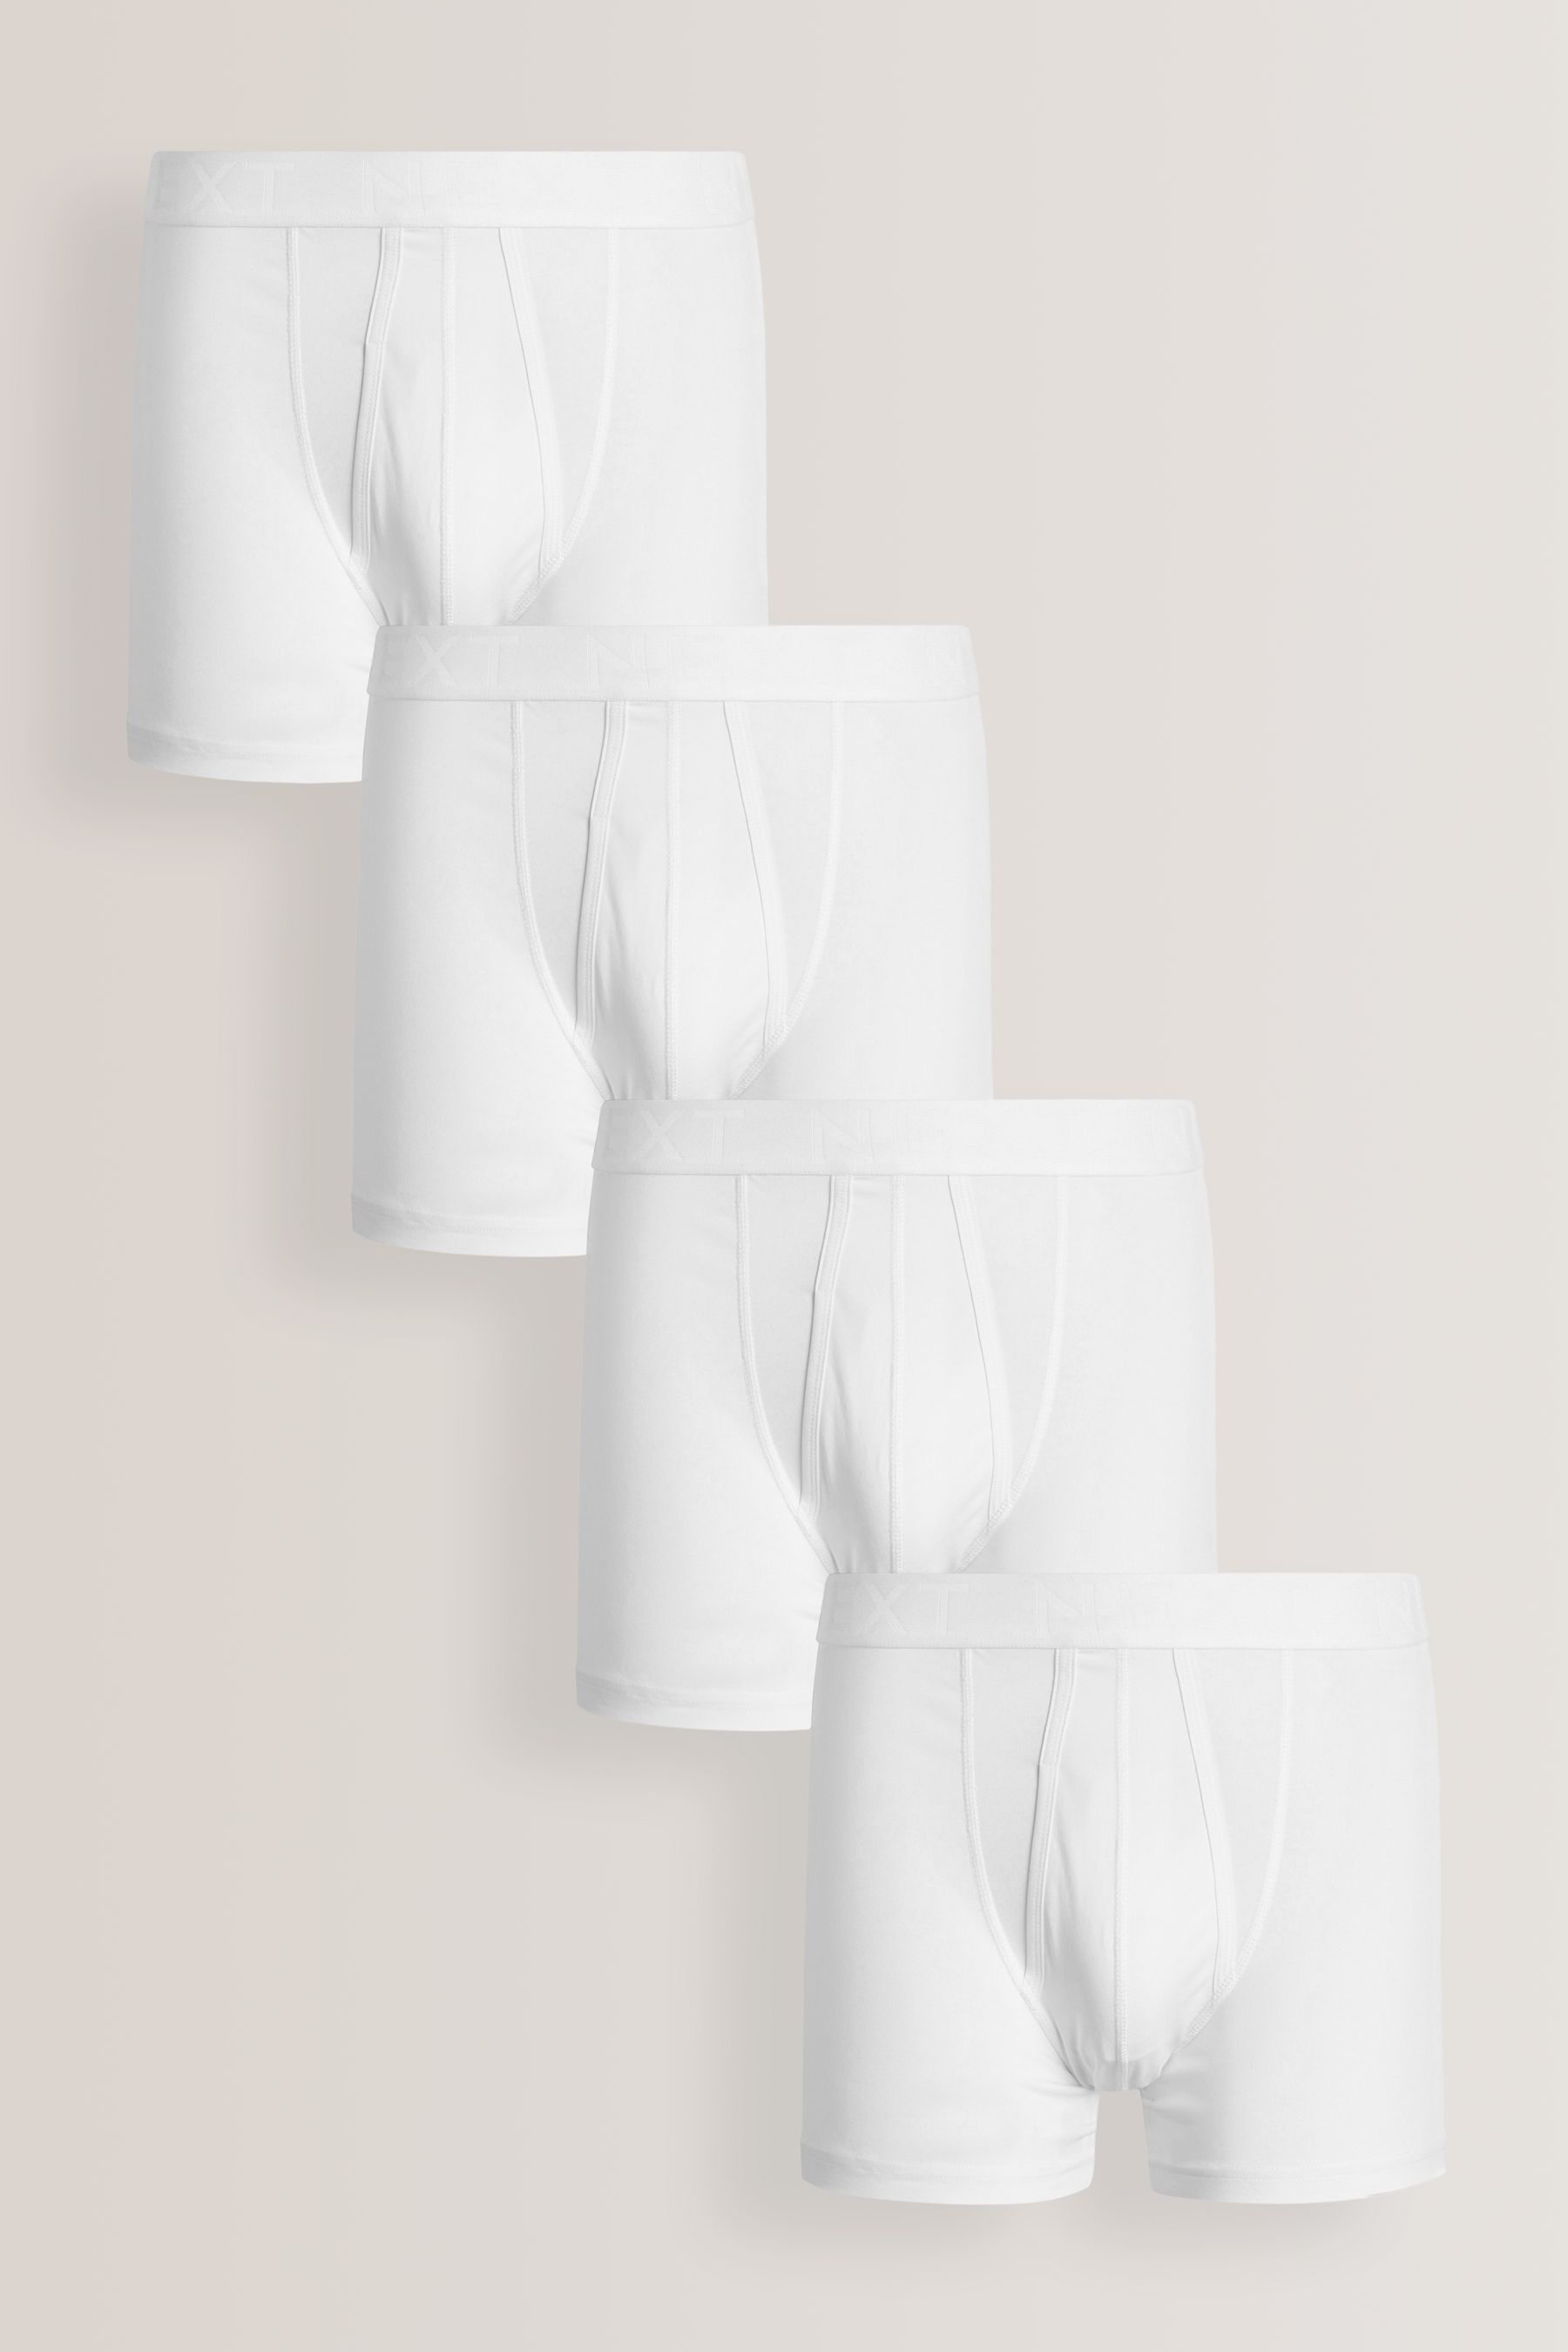 Buy White 4 pack A-Front Boxers from the Next UK online shop